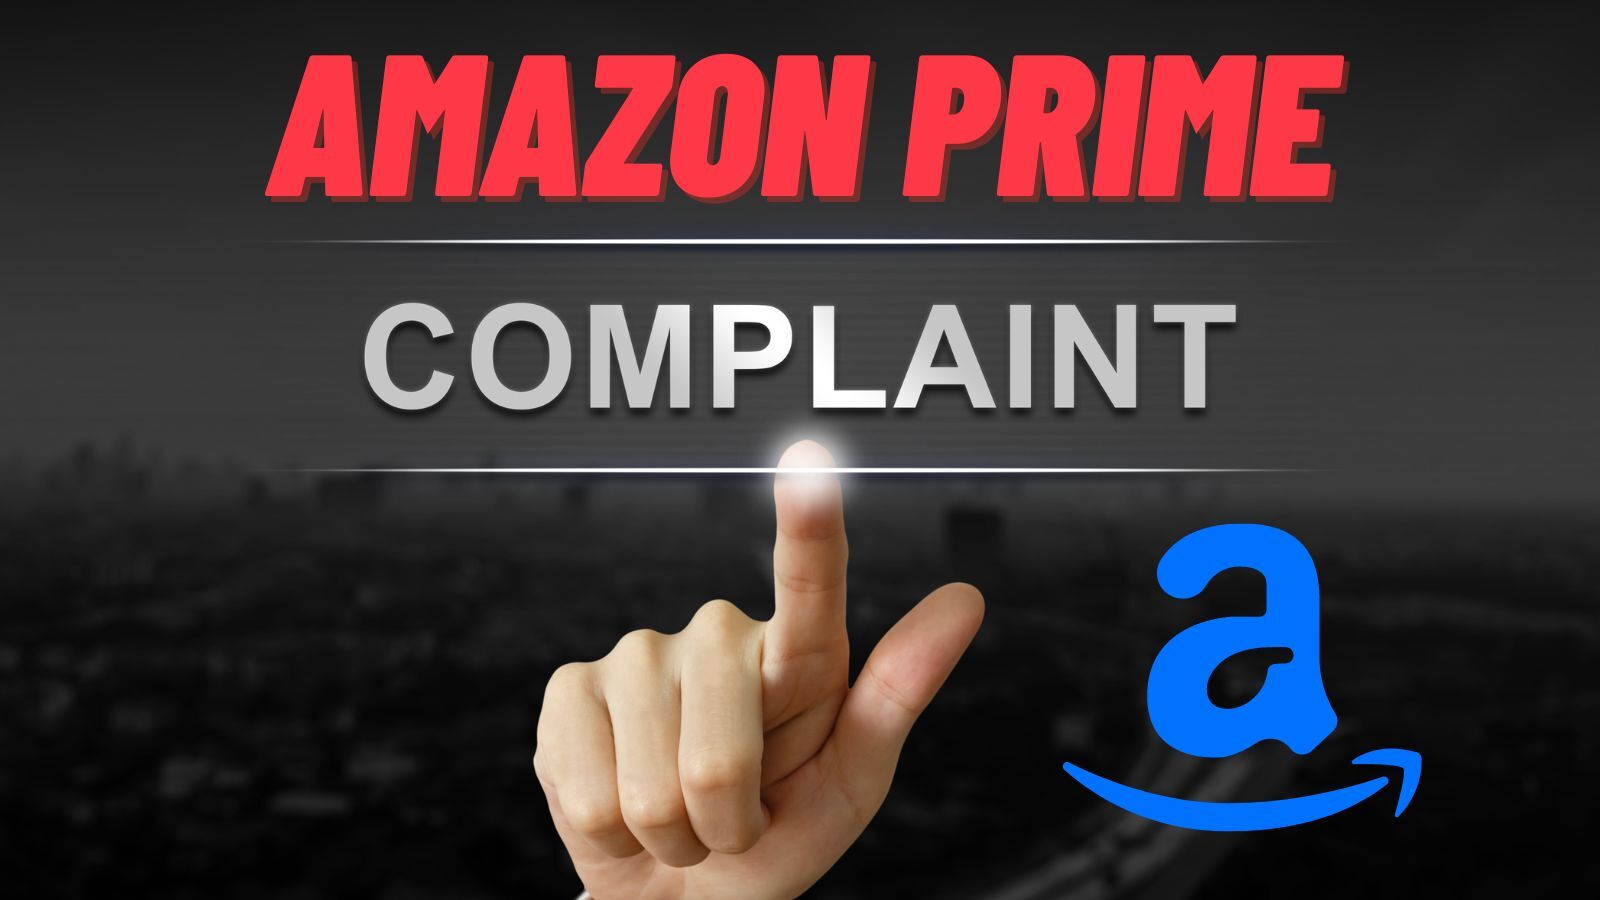 Amazon Prime Complaints: How to Make One & Tips to Get Better Responses